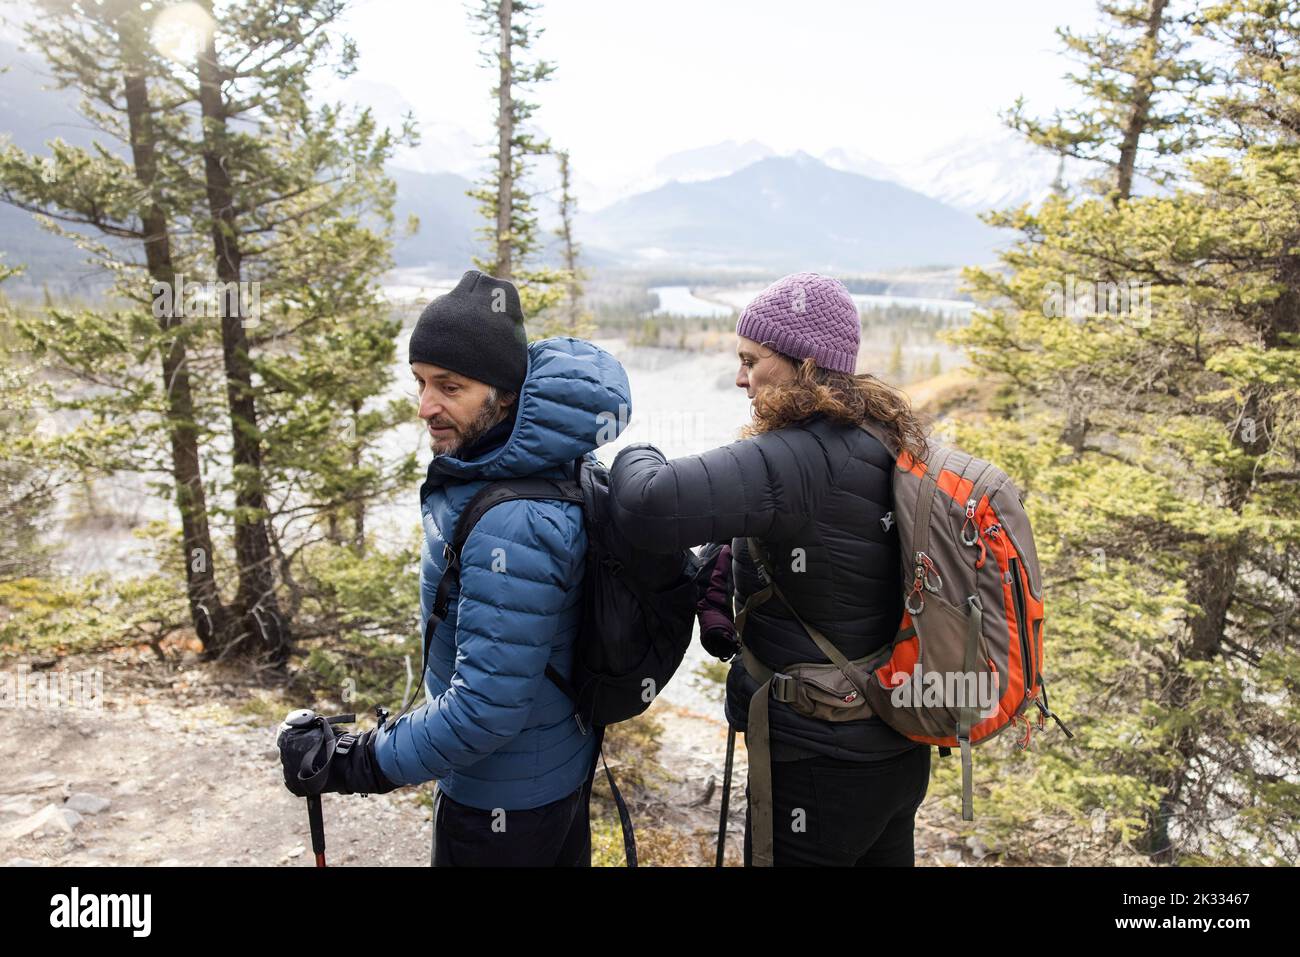 Woman fastening husbands backpack on forest hike Stock Photo